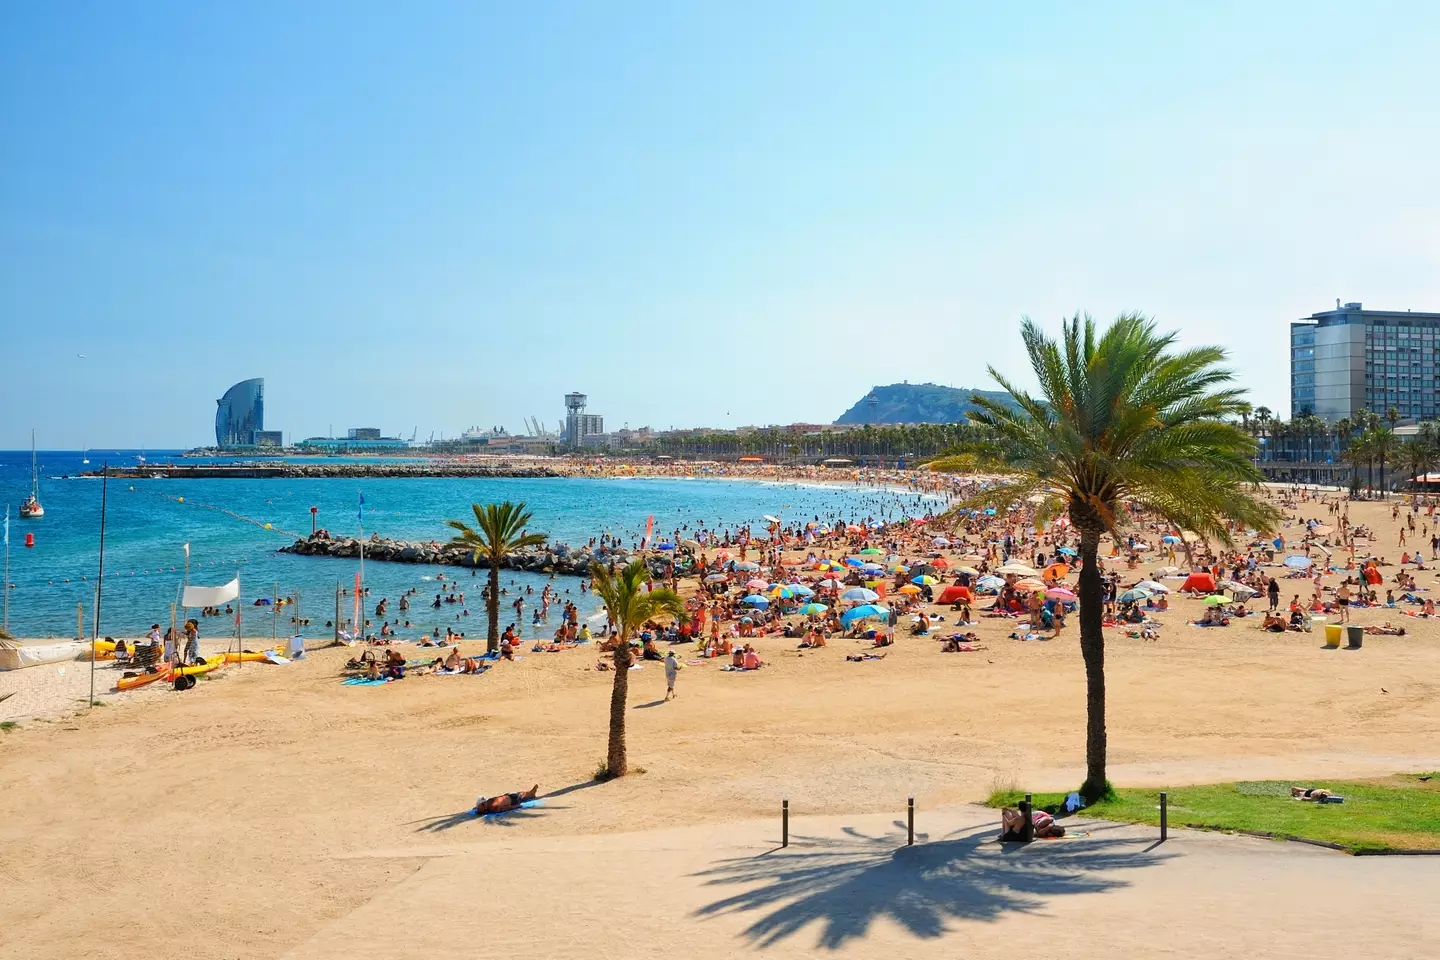 In Barcelona, those who break the rules could face a fine of up to €300 (£254).